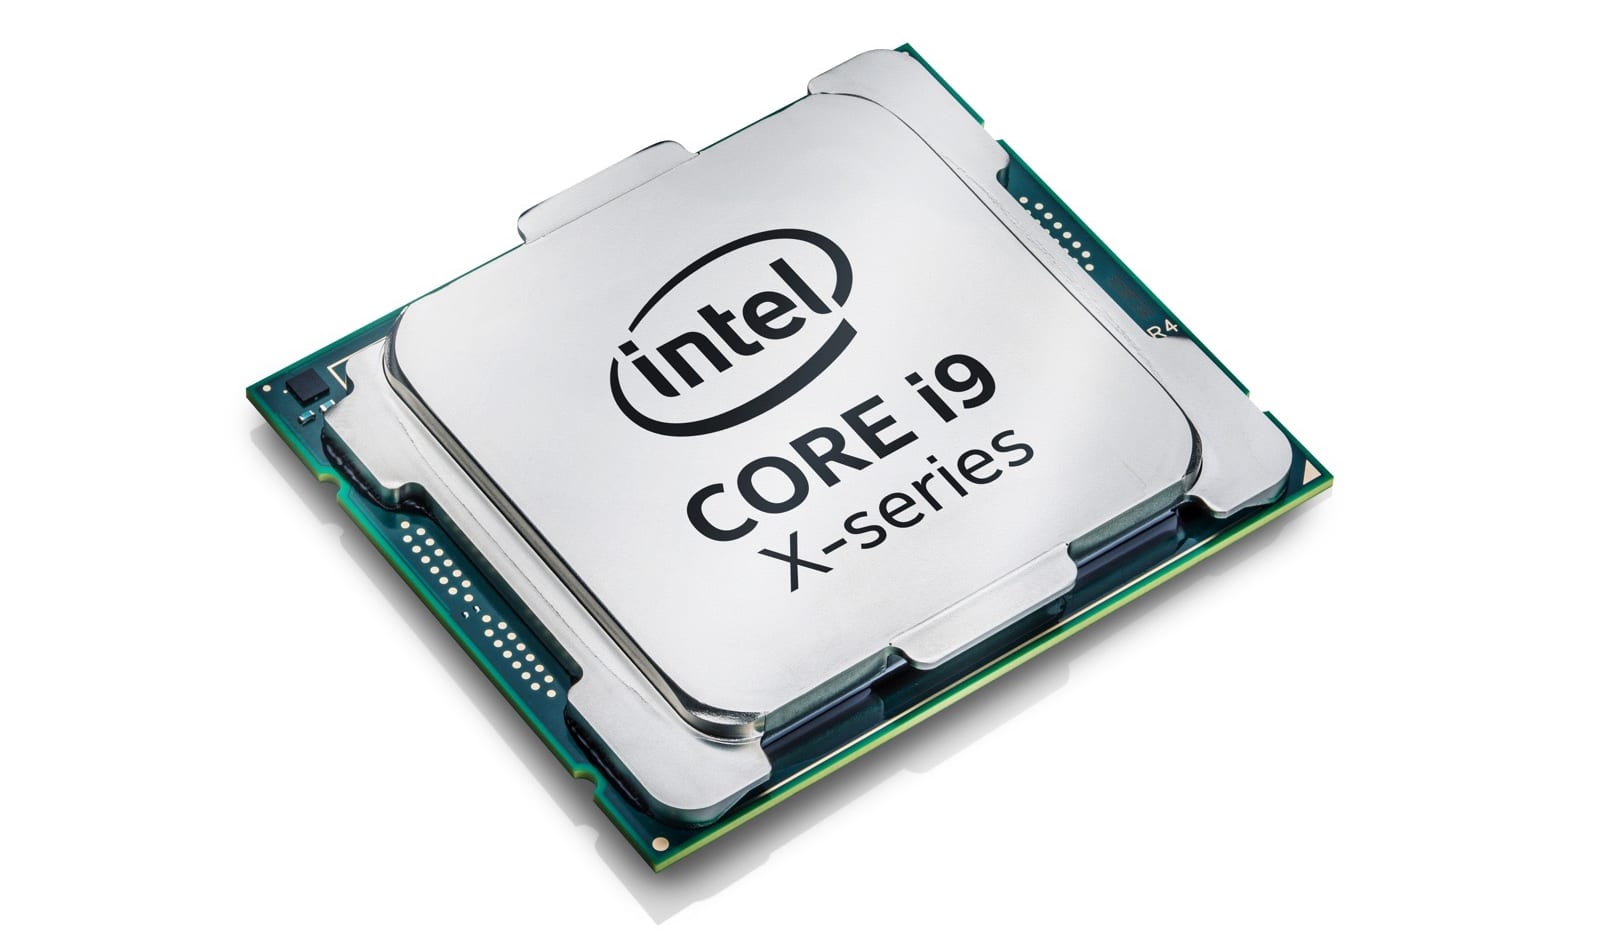 Intel introduced the new IntelÂ® Coreâ„¢ X-series processor family on May 30, 2017. Intelâ€™s most scalable, accessible and powerful desktop platform ever, it includes the new IntelÂ® Coreâ„¢ i9 processor brand and the IntelÂ® Coreâ„¢ i9 Extreme Edition processor â€“ the first consumer desktop CPU with 18 cores and 36 threads of power. The company also introduced the IntelÂ® X299, which adds even more I/O and overclocking capabilities. (Credit: Intel Corporation)